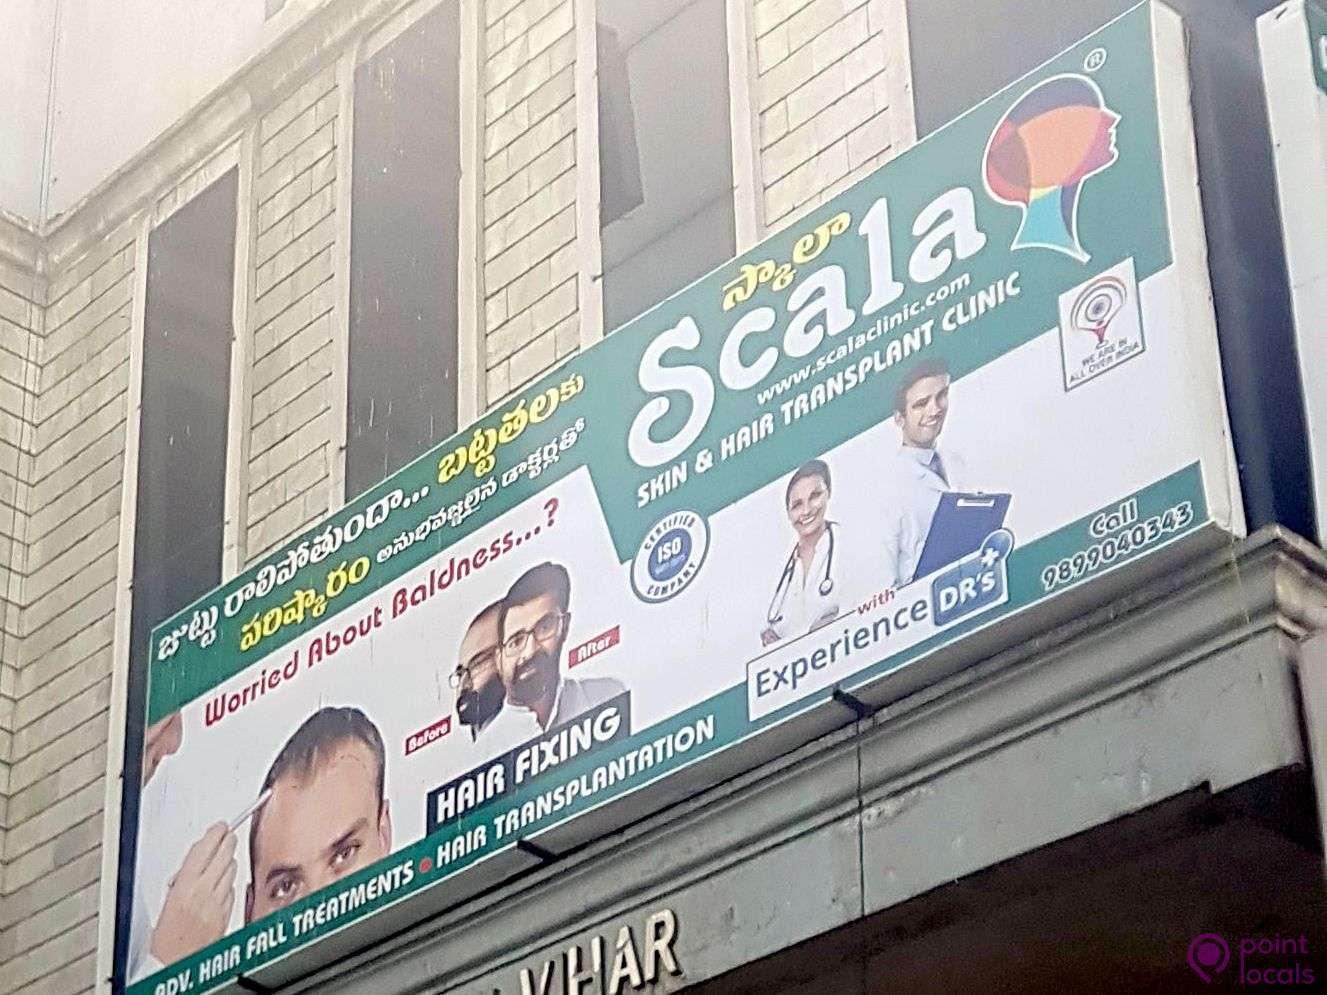 Scala Skin and Hair Transplant Clinic in Rtc Colonylb NagarHyderabad   Book Appointment Online  Best Dermatologists in Hyderabad  Justdial